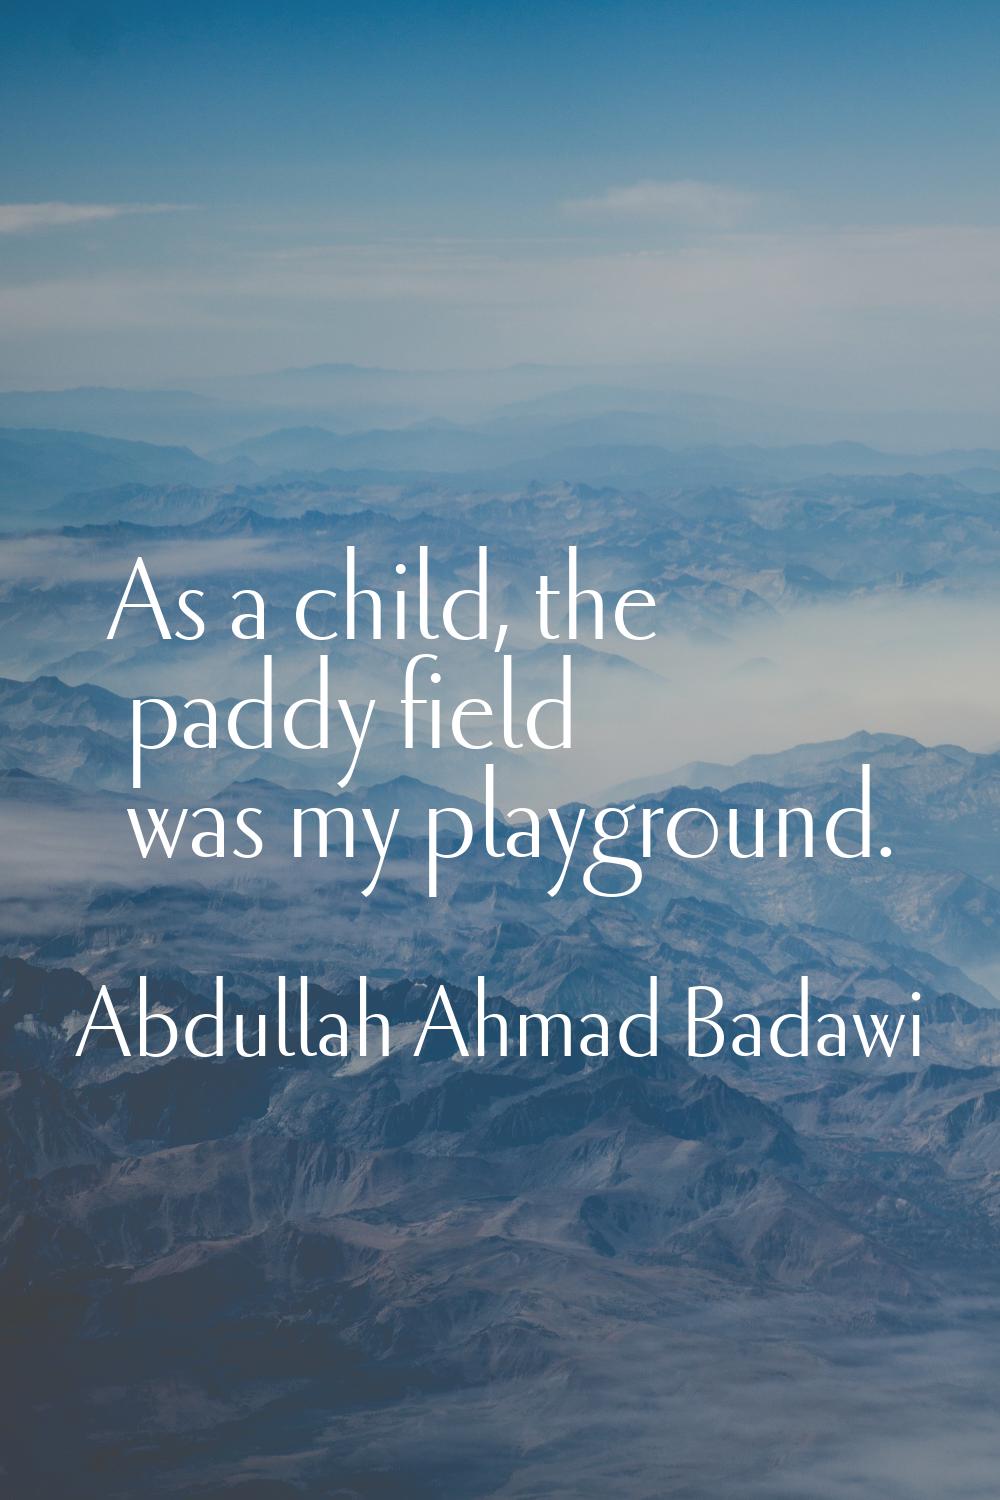 As a child, the paddy field was my playground.